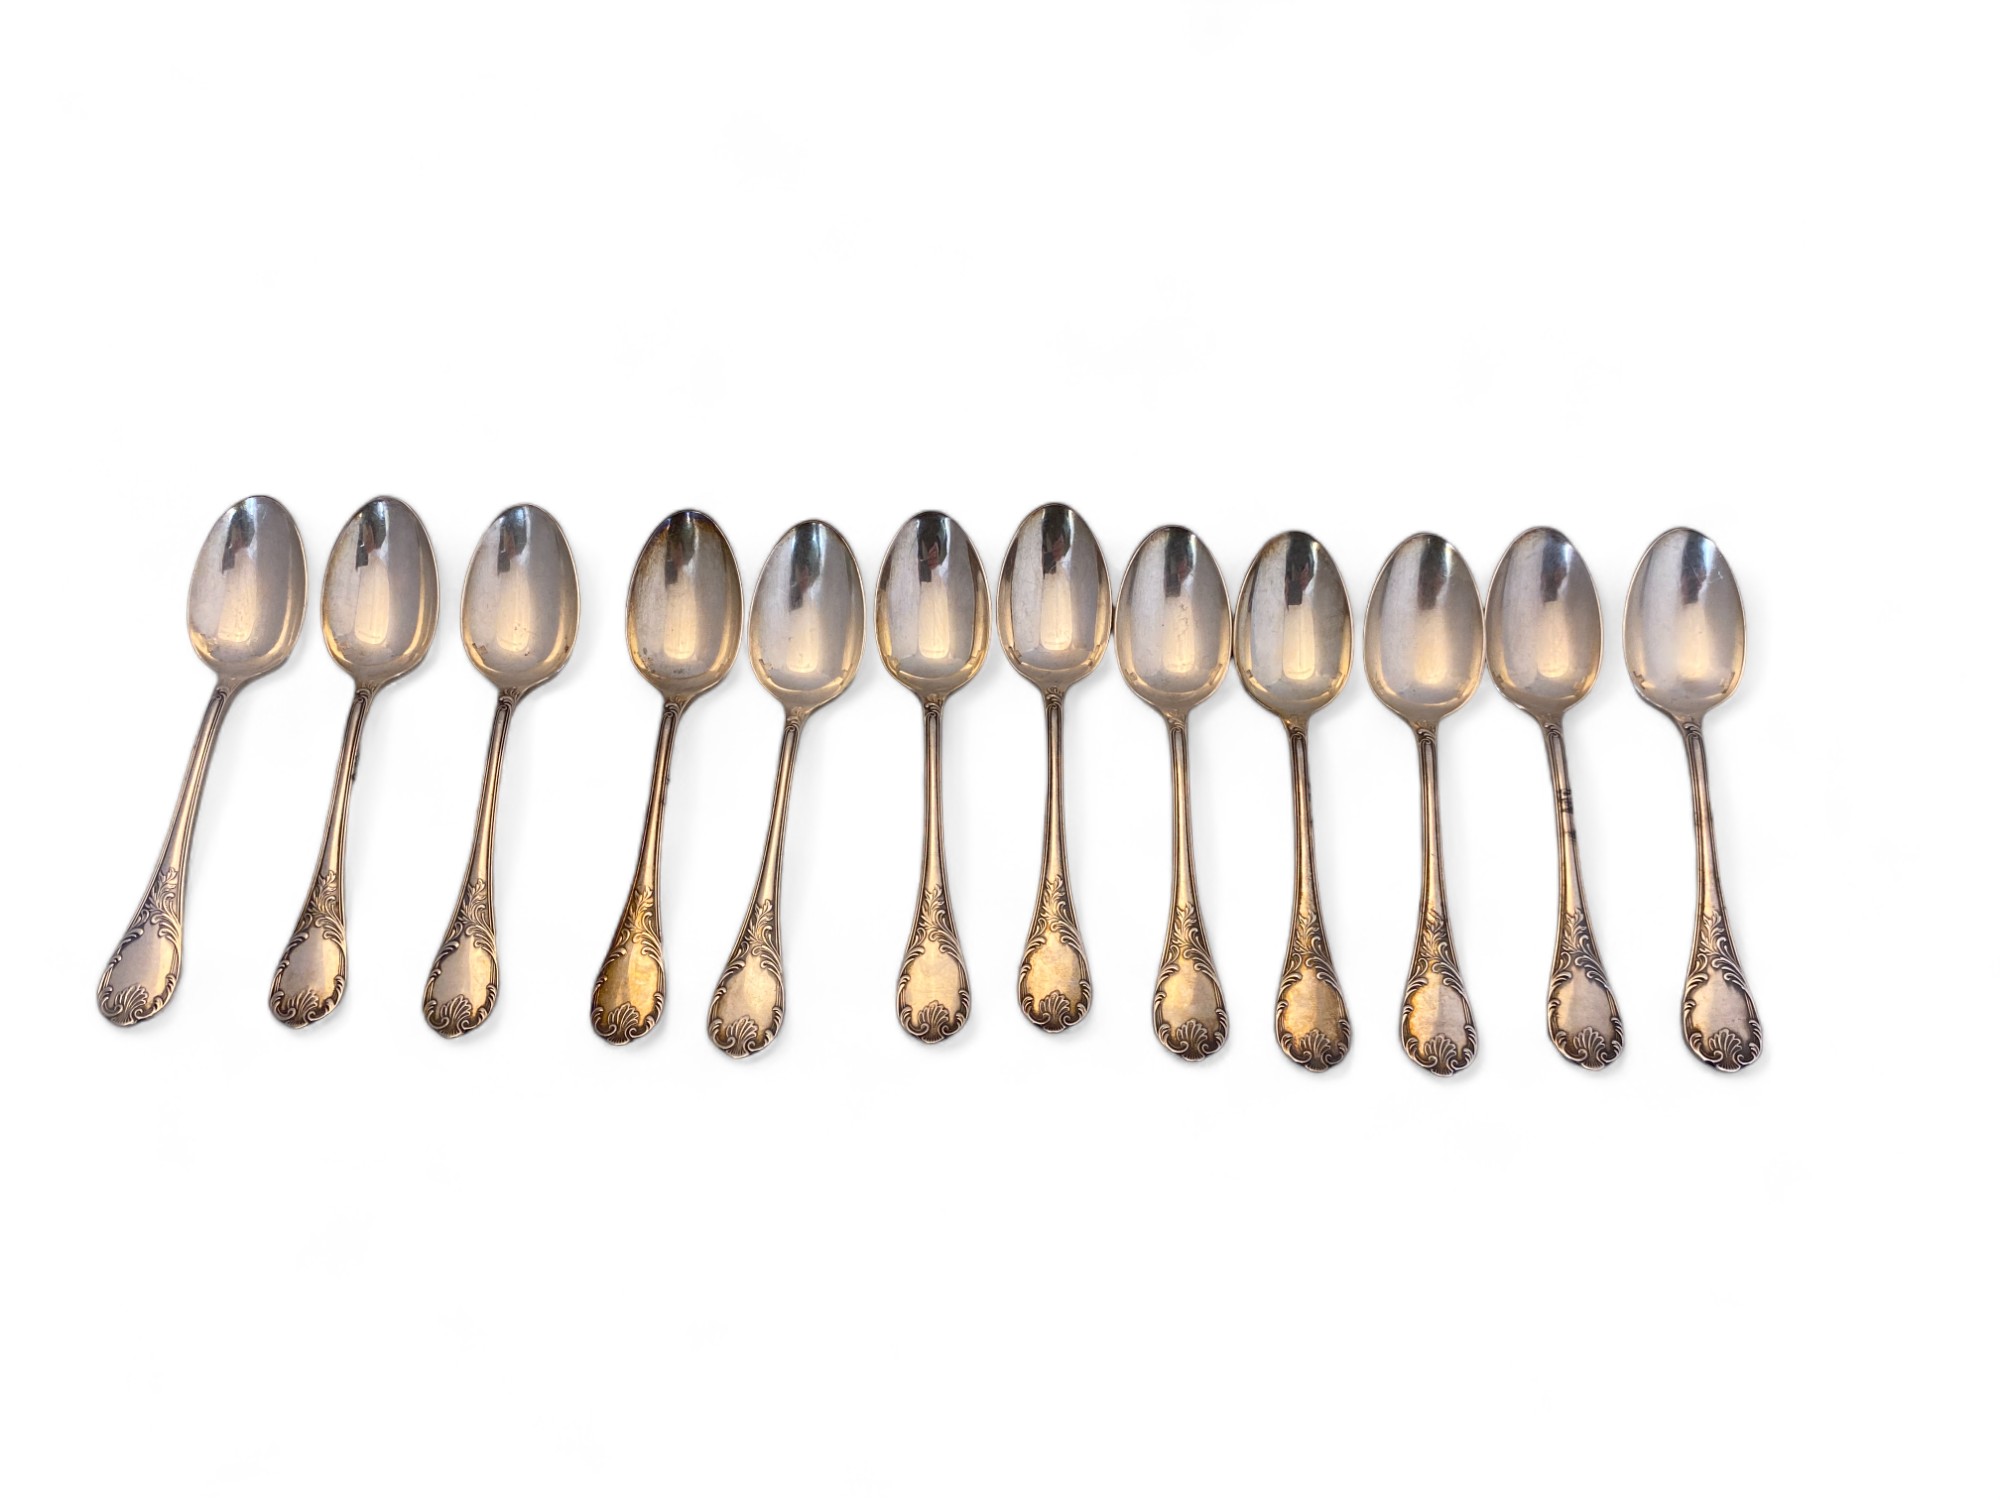 An extensive composite canteen of mostly silver plated Marly pattern cutlery by Christofle, Paris - Image 37 of 99